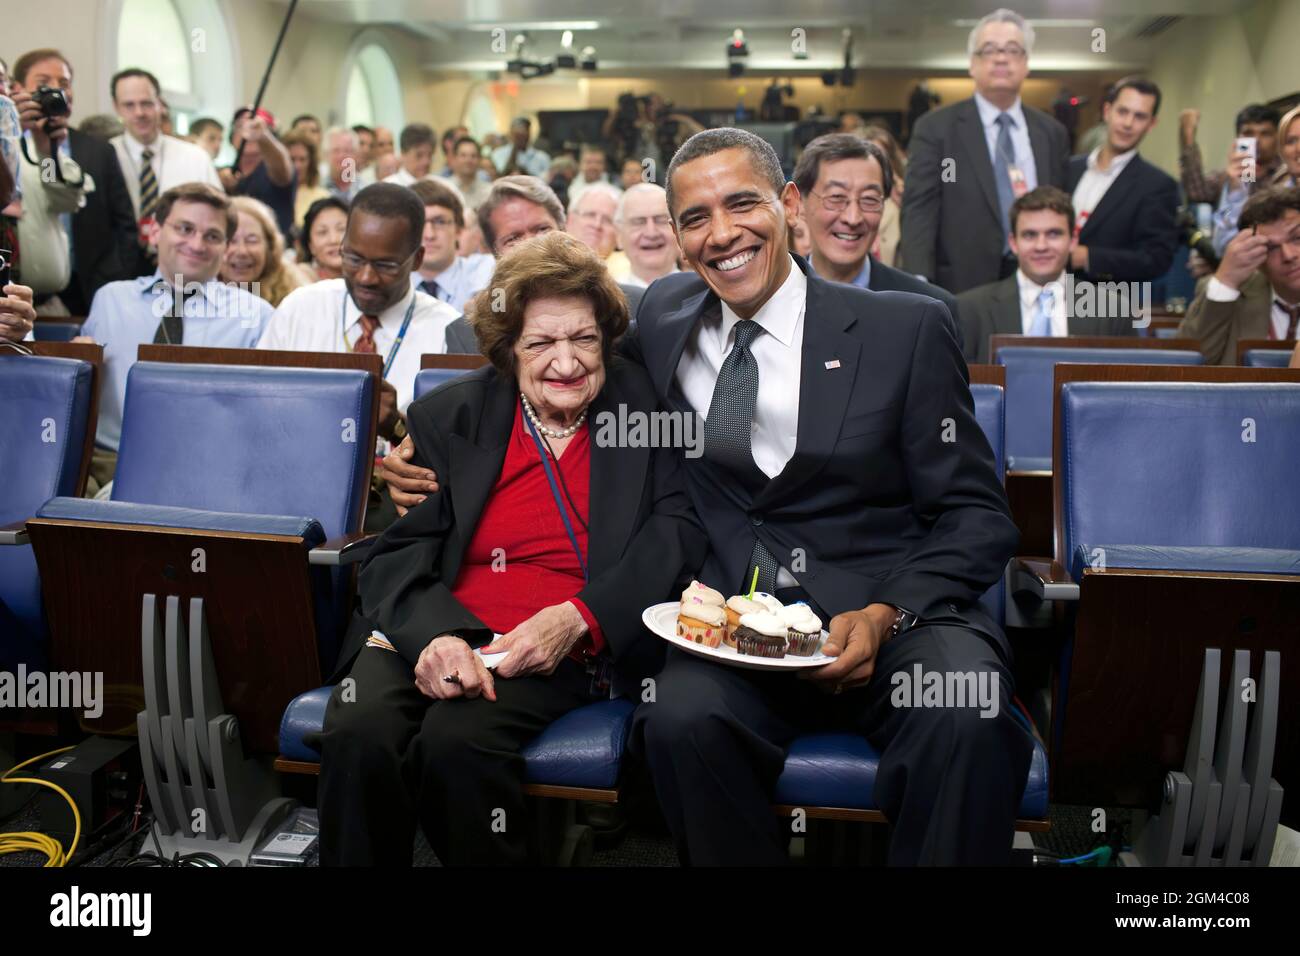 President Barack Obama presents cupcakes with a candle to Hearst White House columnist Helen Thomas in honor of her birthday in the James Brady Briefing Room, August 4, 2009. Thomas, who turned 89 , shares the same birthday as Obama, who turne 48 years old. (Official White House Photo by Pete Souza) This official White House photograph is being made available only for publication by news organizations and/or for personal use printing by the subject(s) of the photograph. The photograph may not be manipulated in any way and may not be used in commercial or political materials, advertisements, em Stock Photo